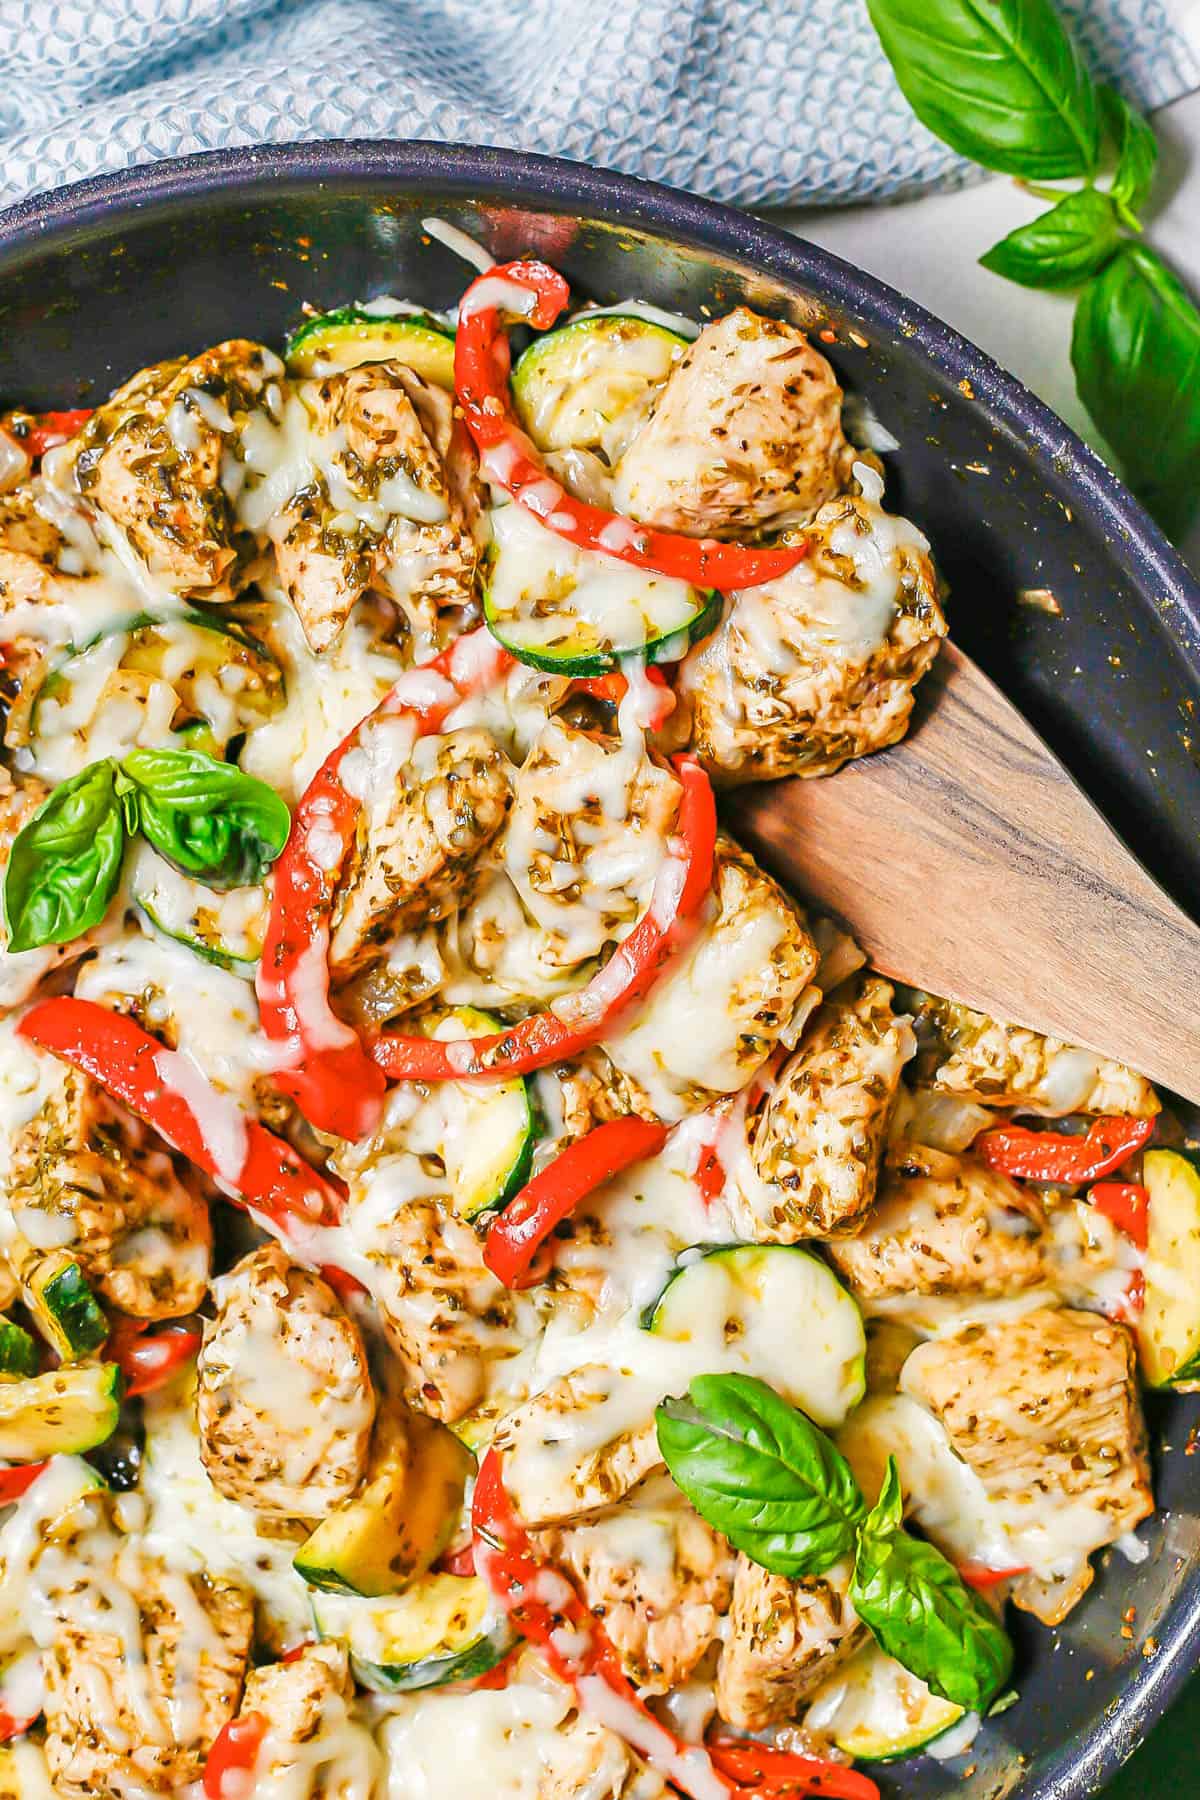 A wooden spatula scooping up a pesto chicken and veggie mixture from a large dark skillet.